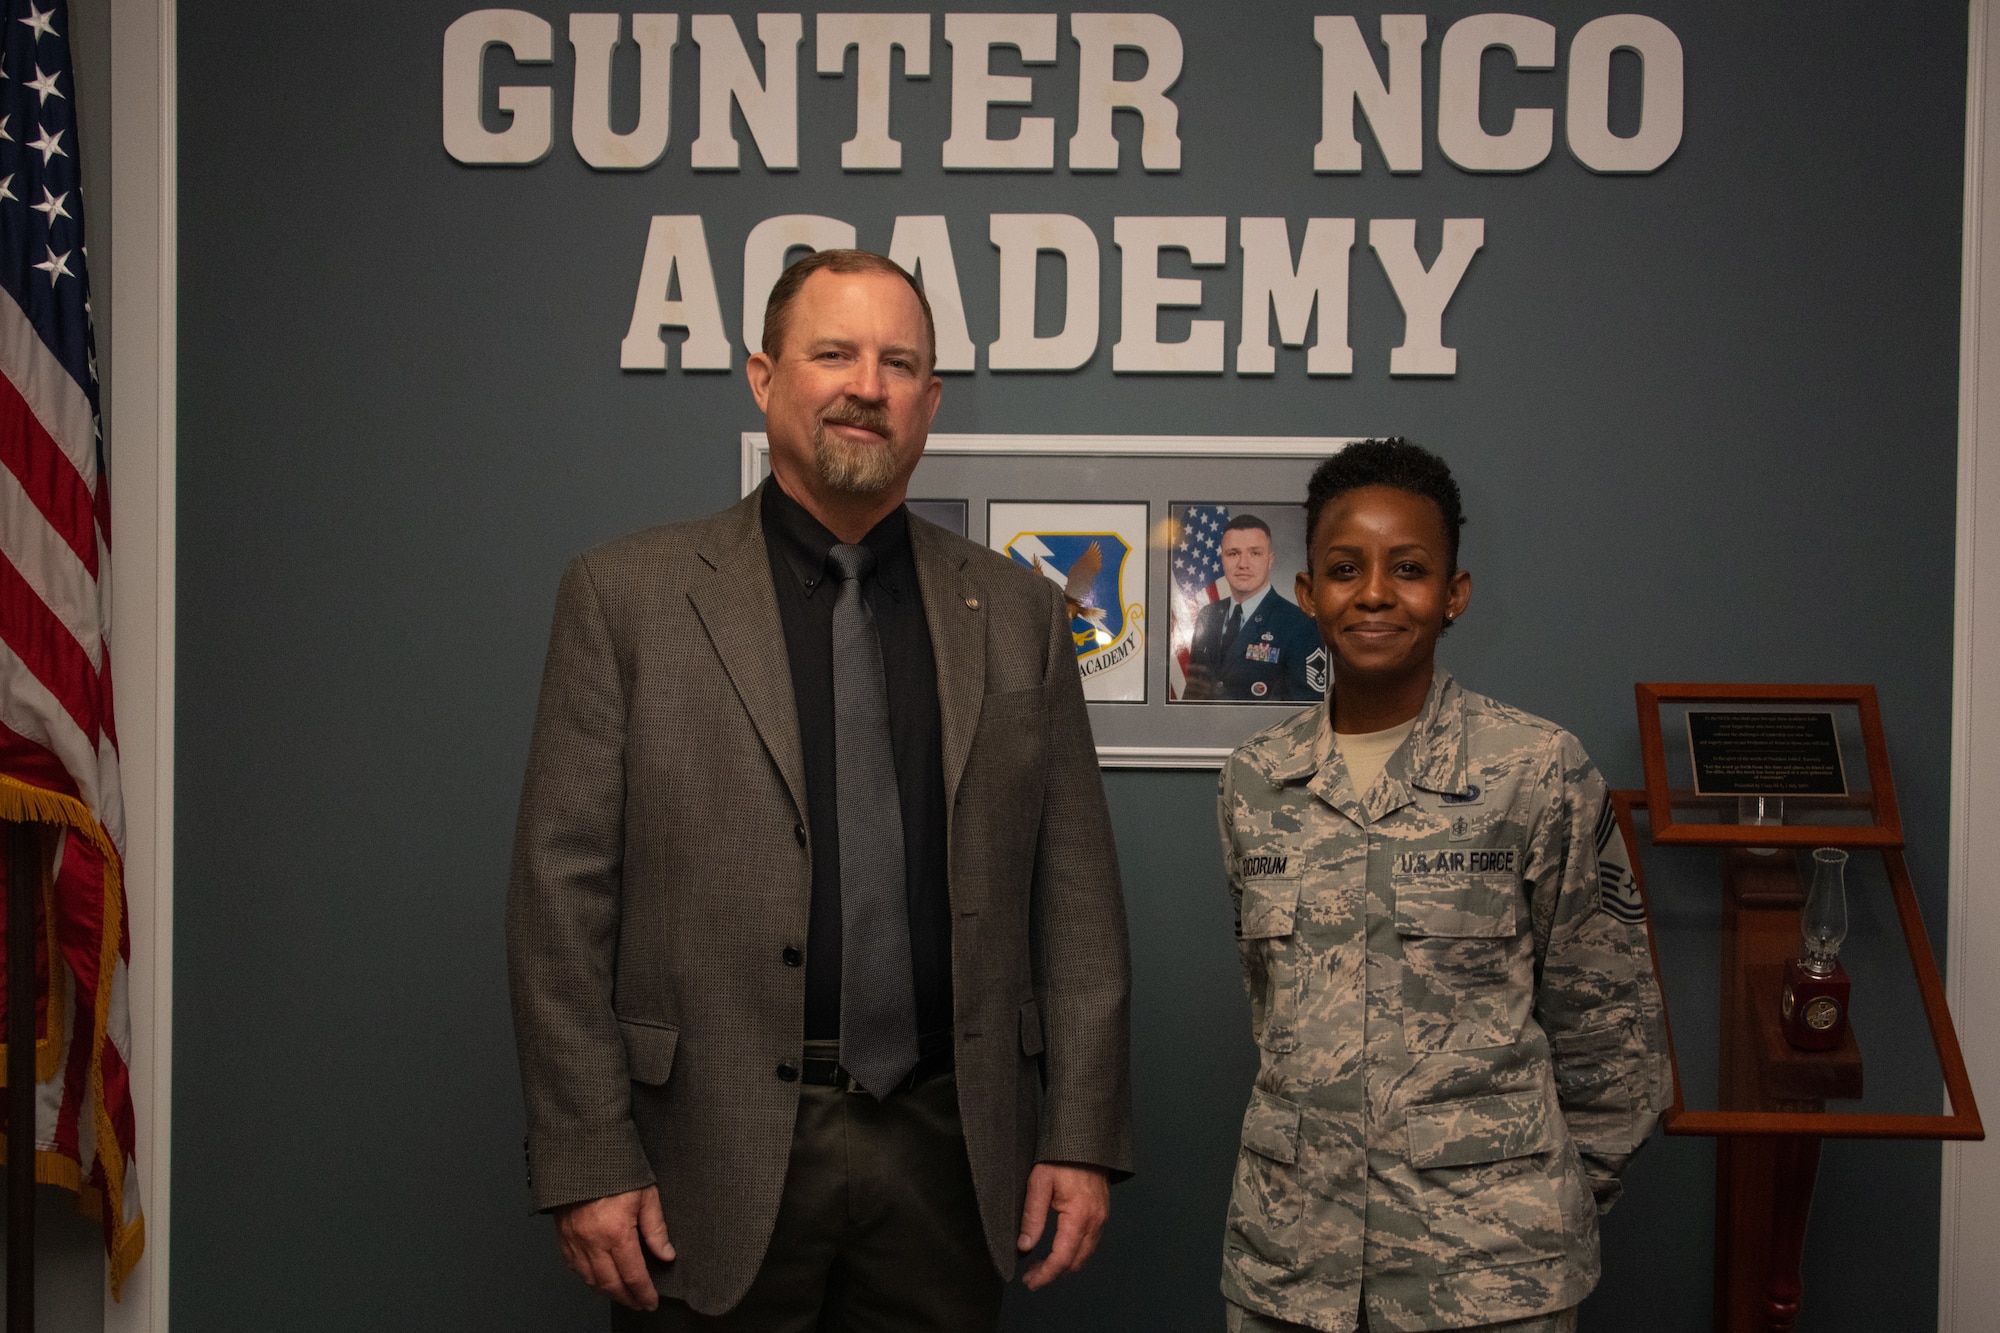 Toxie Robbins, former Gunter Noncommissioned Officer Academy commandant, poses for a photo beside Chief Master Sgt. Rosita Goodrum, the new commandant of Gunter NCOA